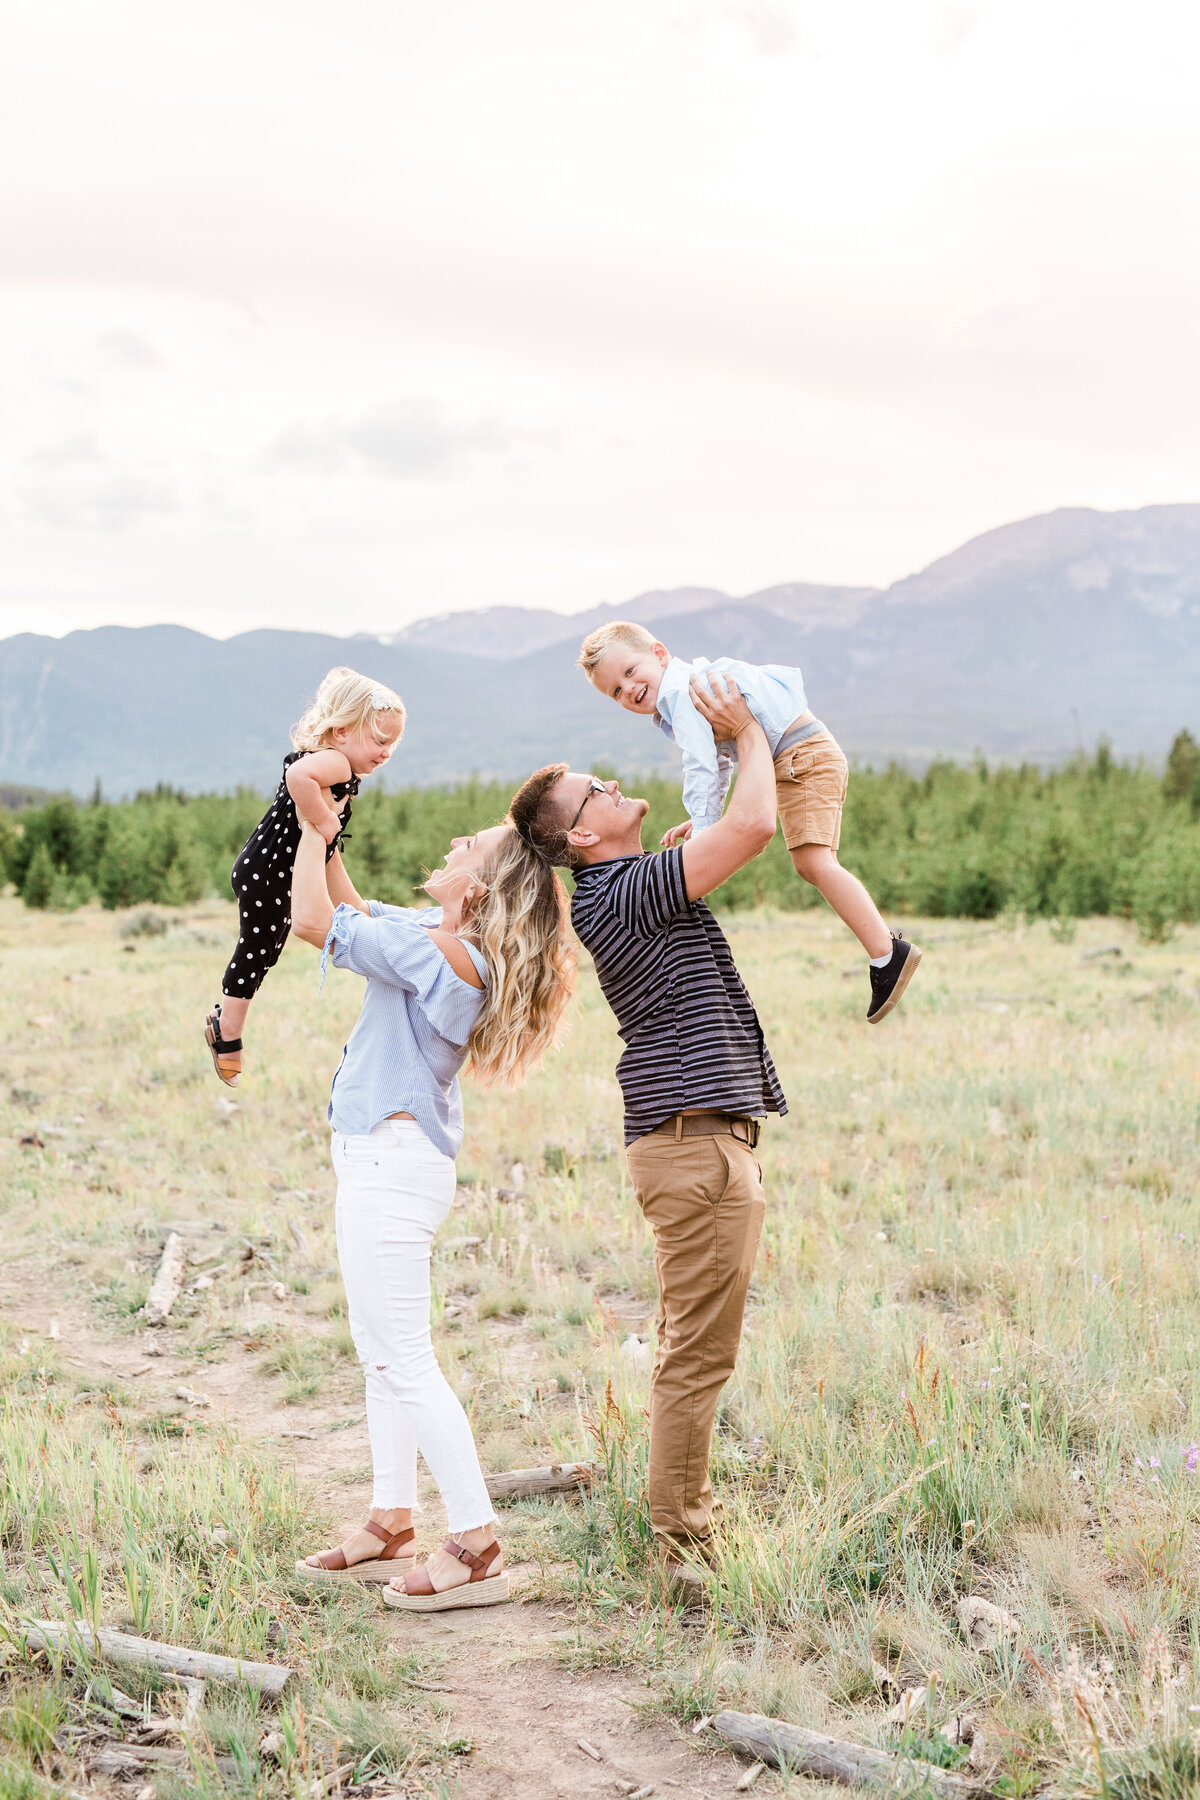 Two parents stand back to back as they swing their young children joyfully above their heads